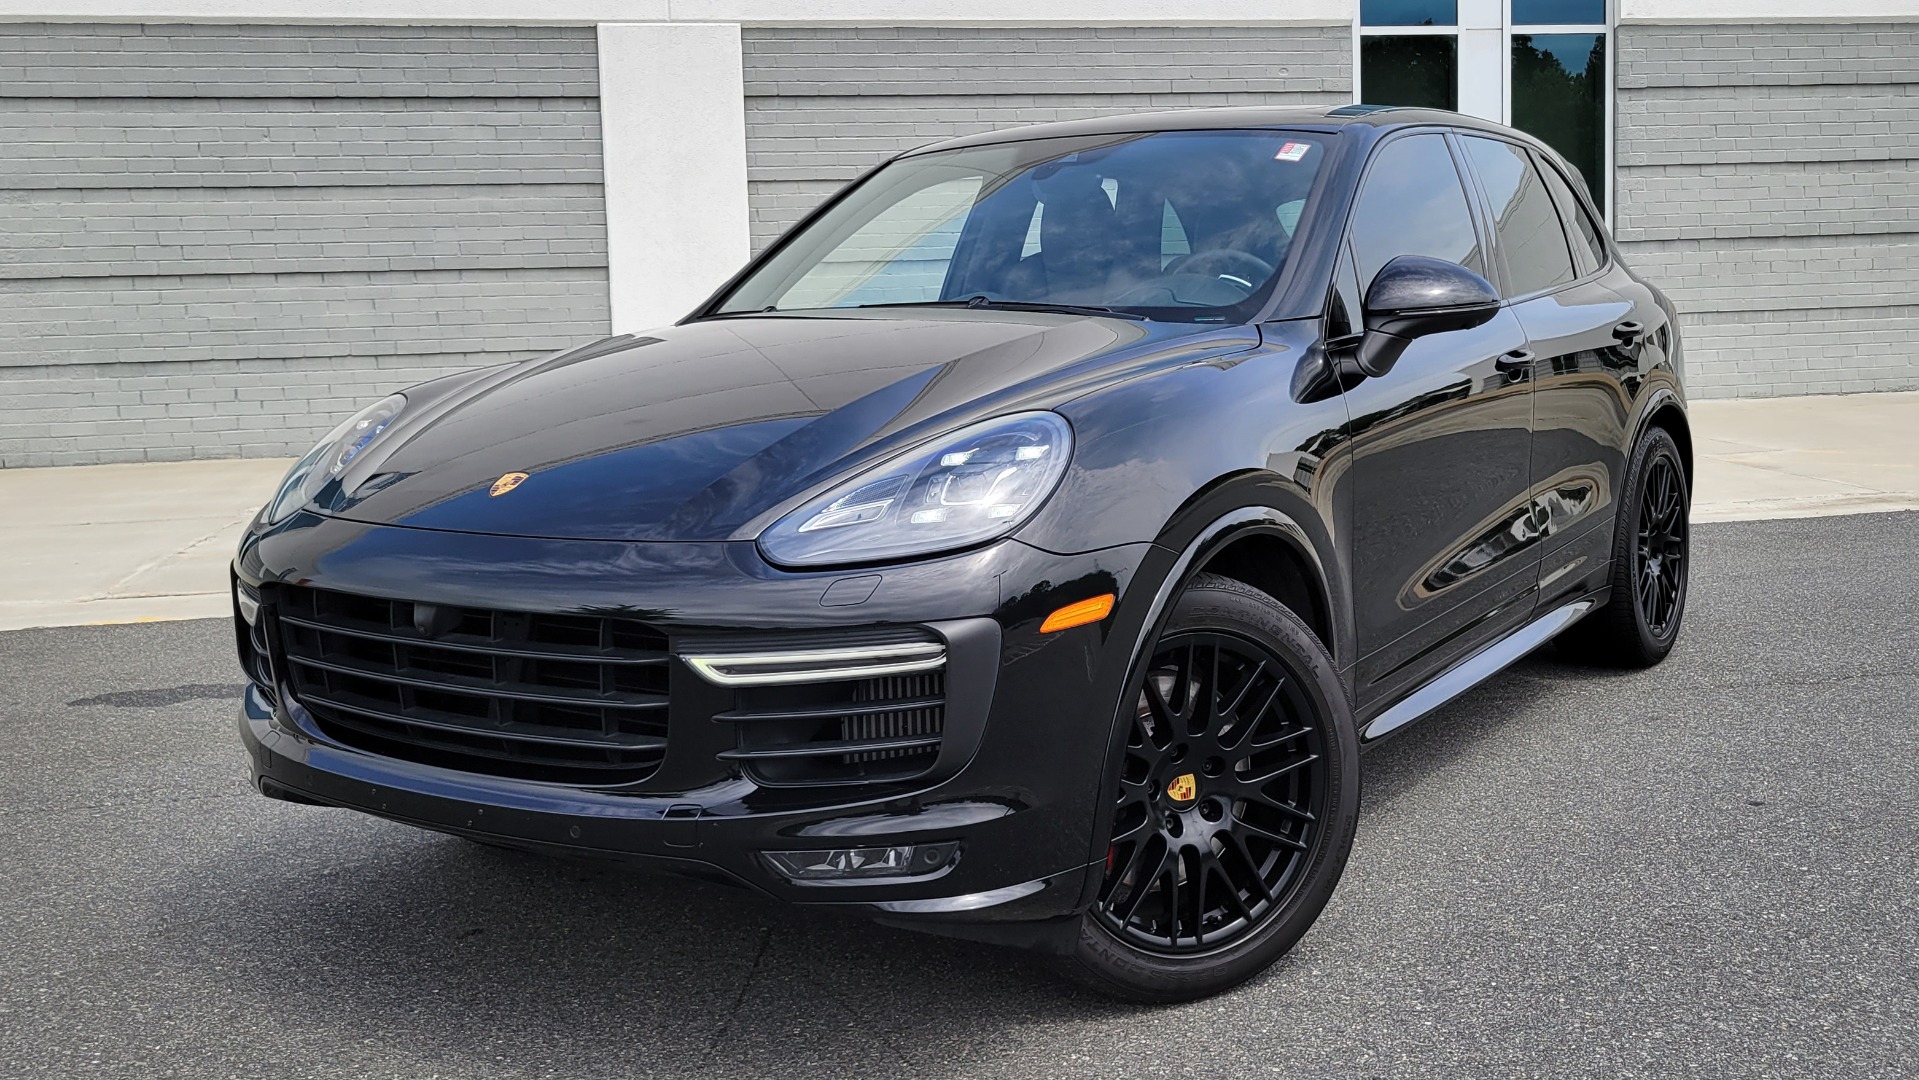 Used 2017 Porsche CAYENNE GTS 3.6L / NAV / SUNROOF / BOSE / PARK ASST / LCA / CAMERA for sale $64,995 at Formula Imports in Charlotte NC 28227 1